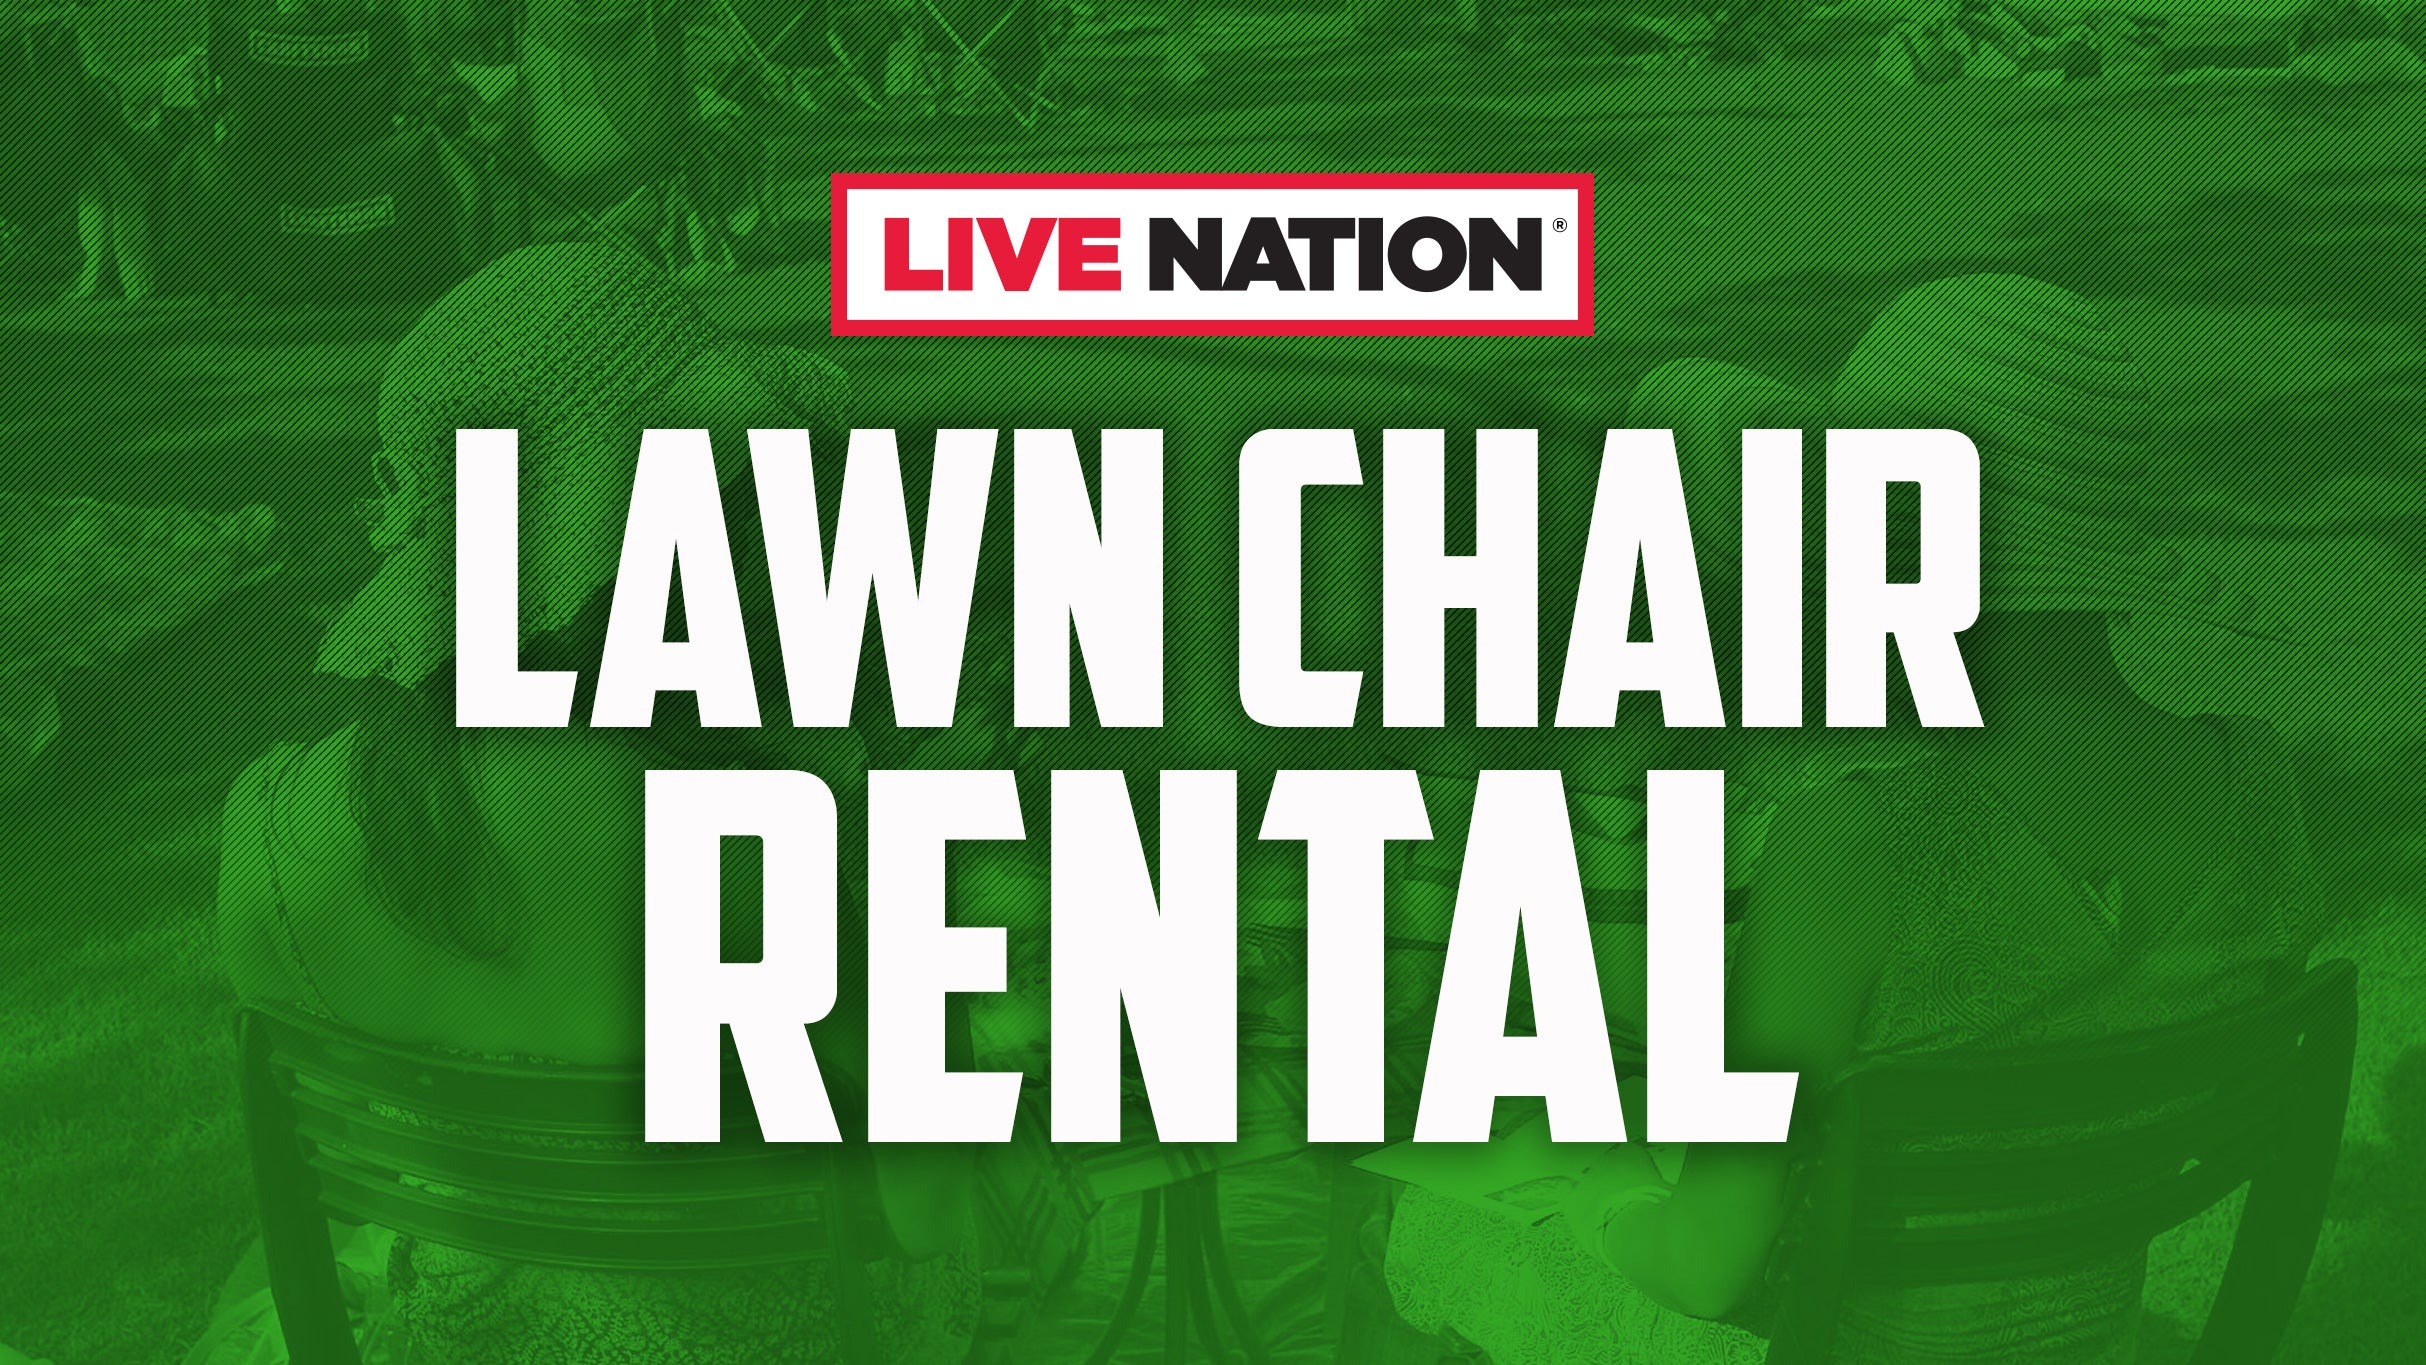 Ticket Reselling Lawn Chair Rental: Judas Priest - NOT A CONCERT TICKET